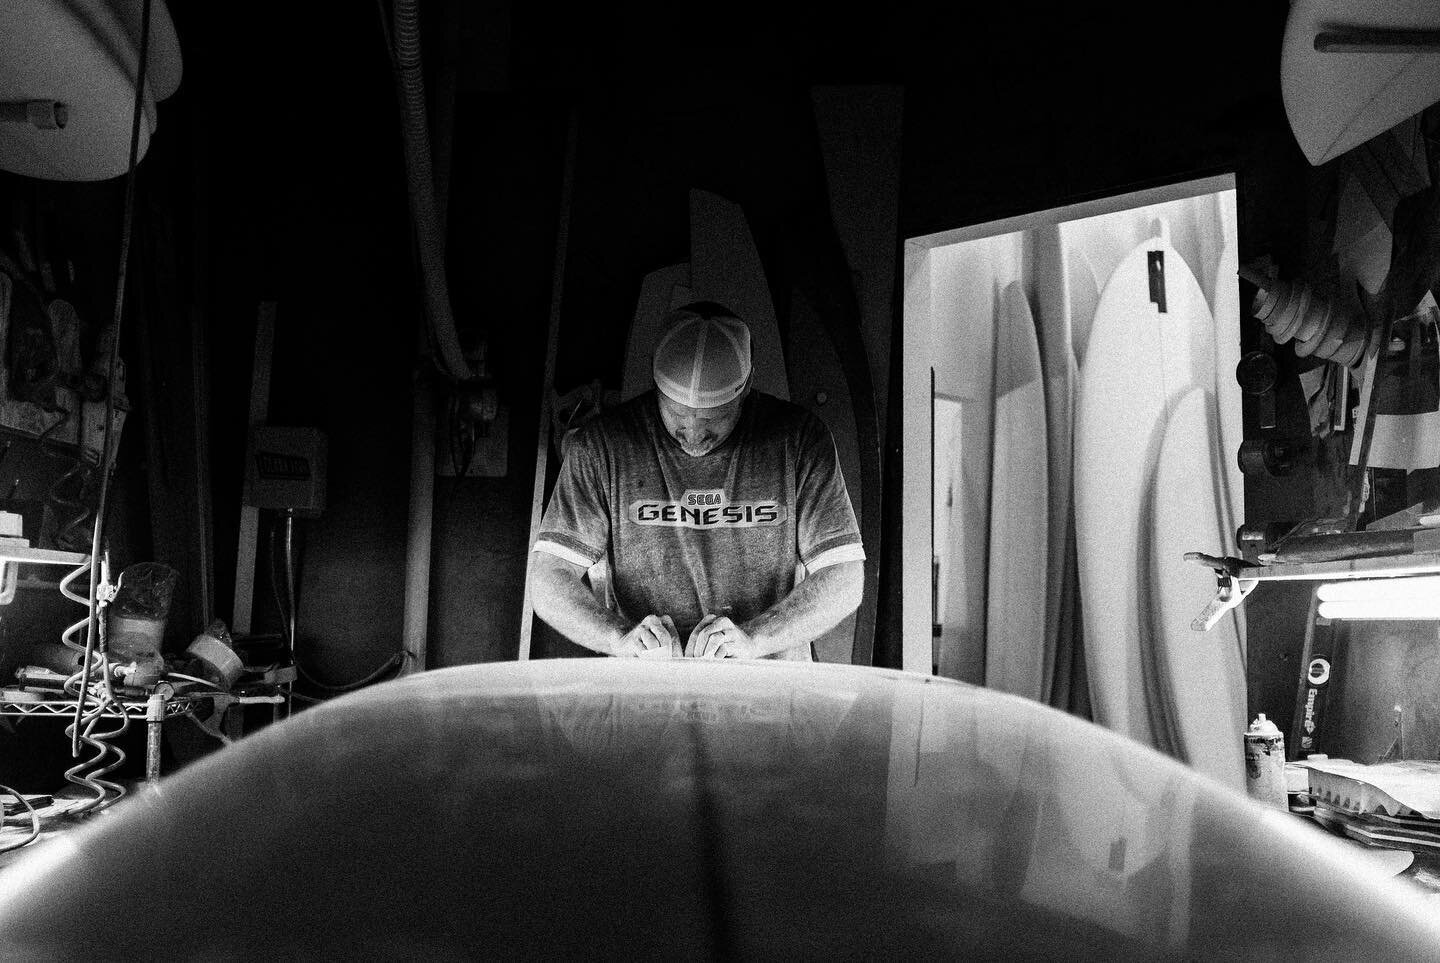 Scott Anderson was a legend and a true master of his craft. It was an honor meeting you and watching you work. May your soul Rest In Peace. Your legacy will continue to inspire us each and every day.
&bull;
&bull;
&bull;
#andersonsurfboards #aquatech